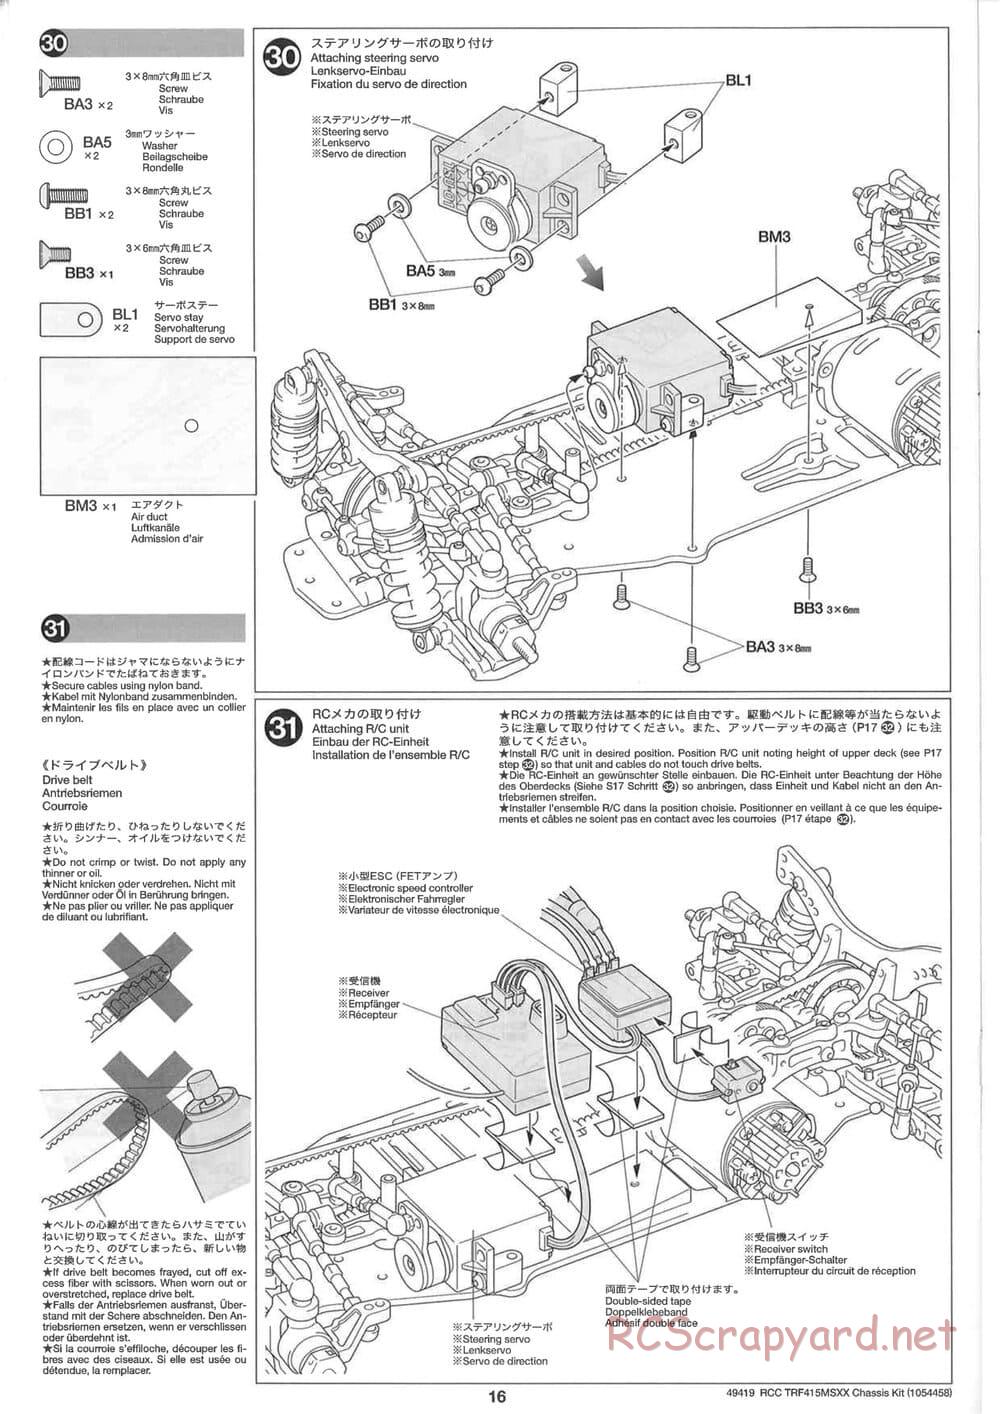 Tamiya - TRF415-MSXX Chassis - Manual - Page 16